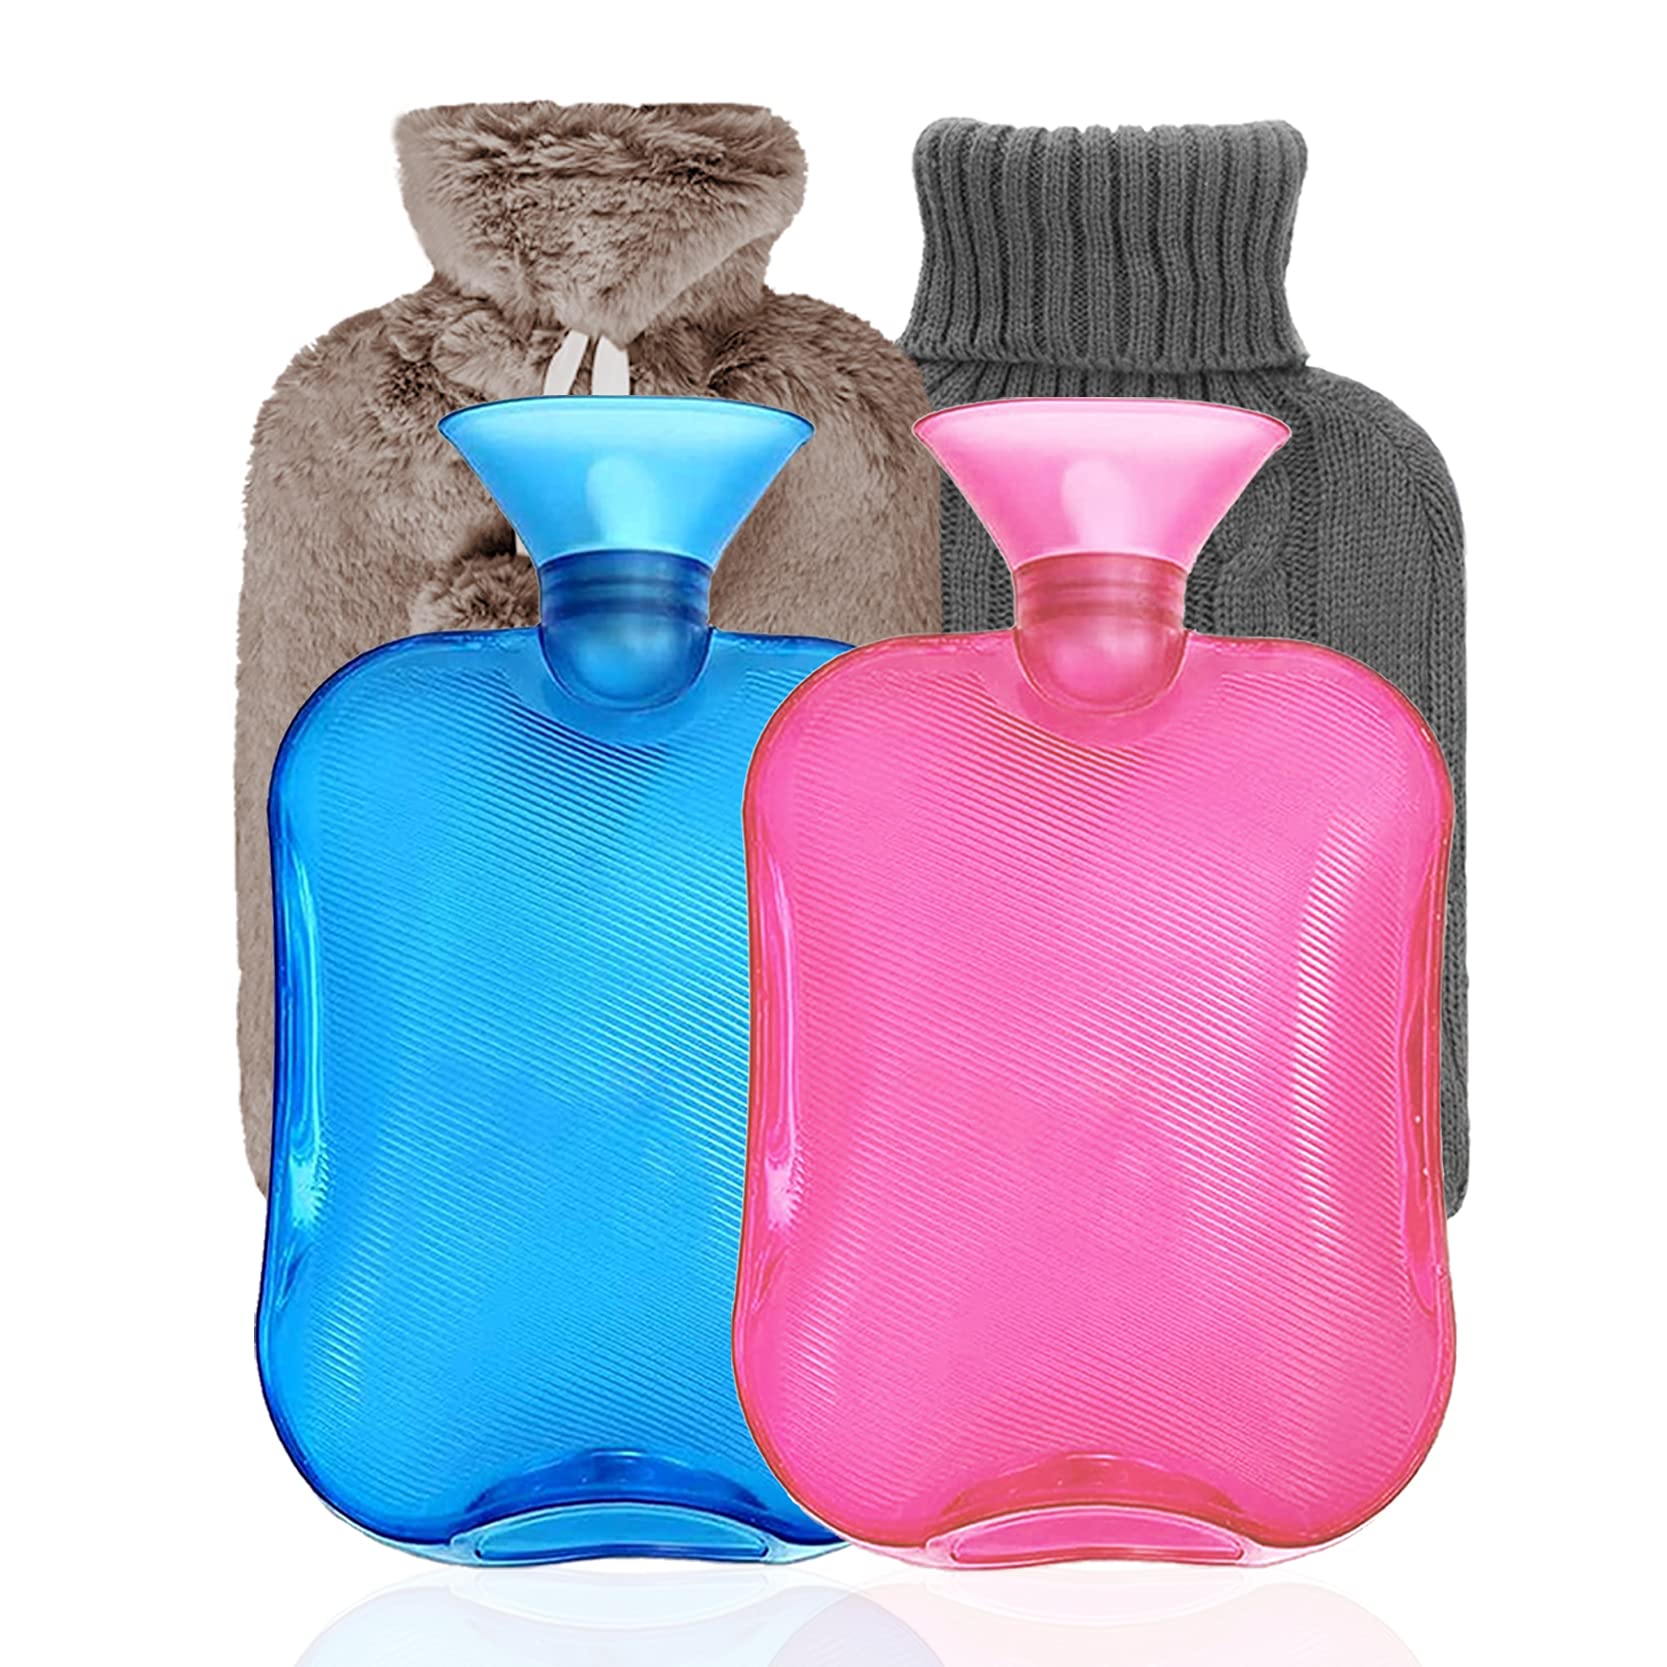 Buy FINE ONE Hot Water Bottle, Hot Water Bag for Pain Relief